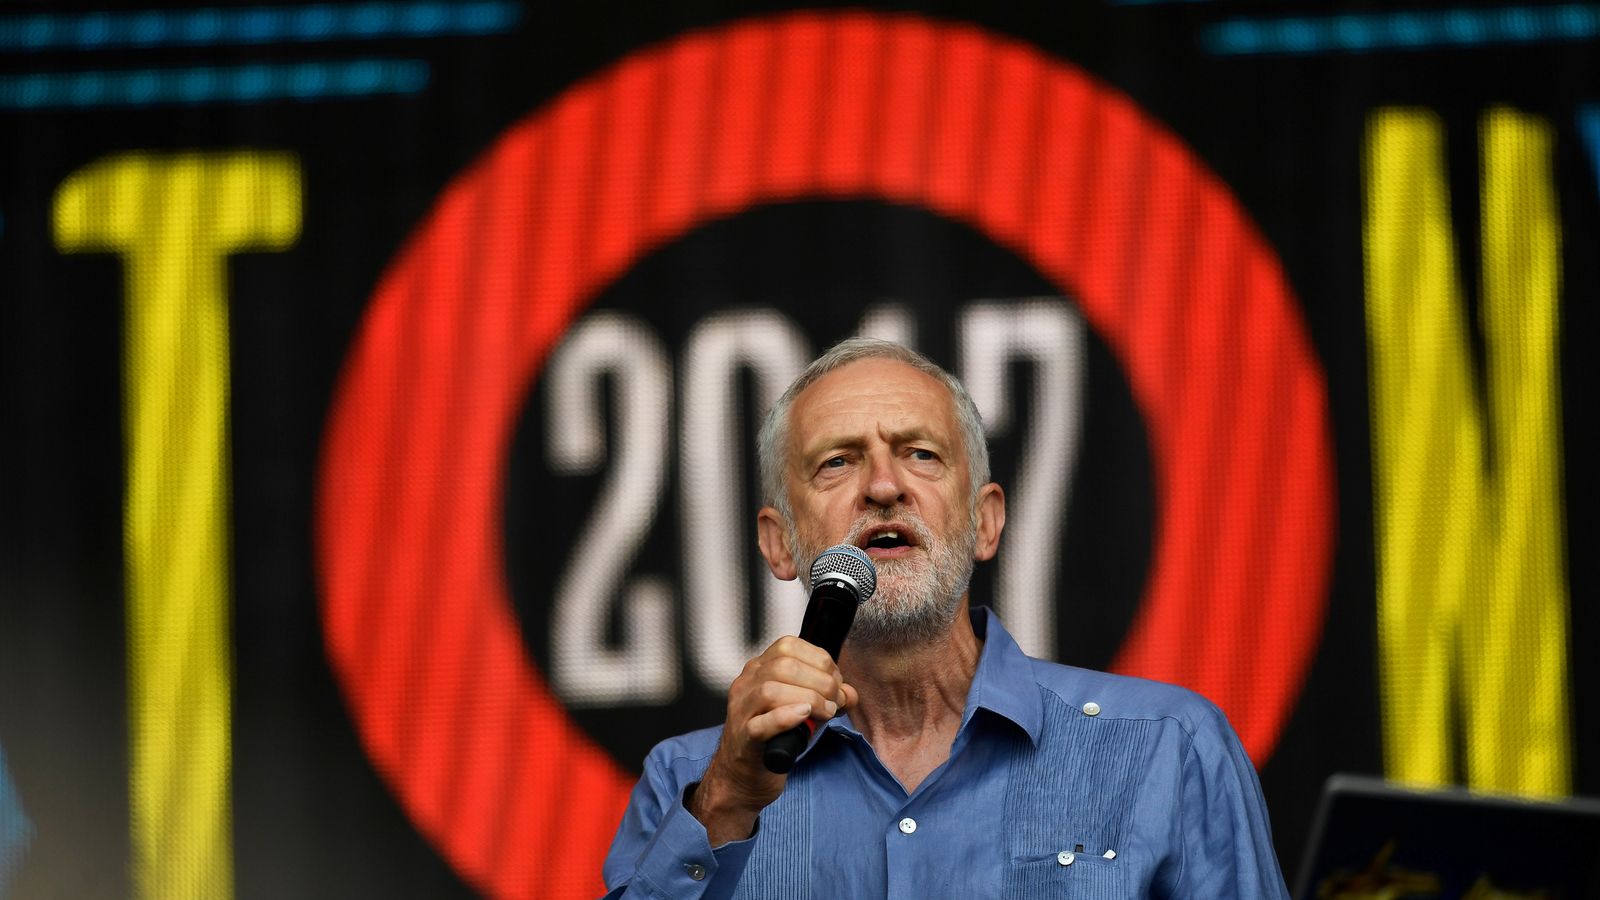 Jeremy corbyn minister prime six months says he report will glastonbury